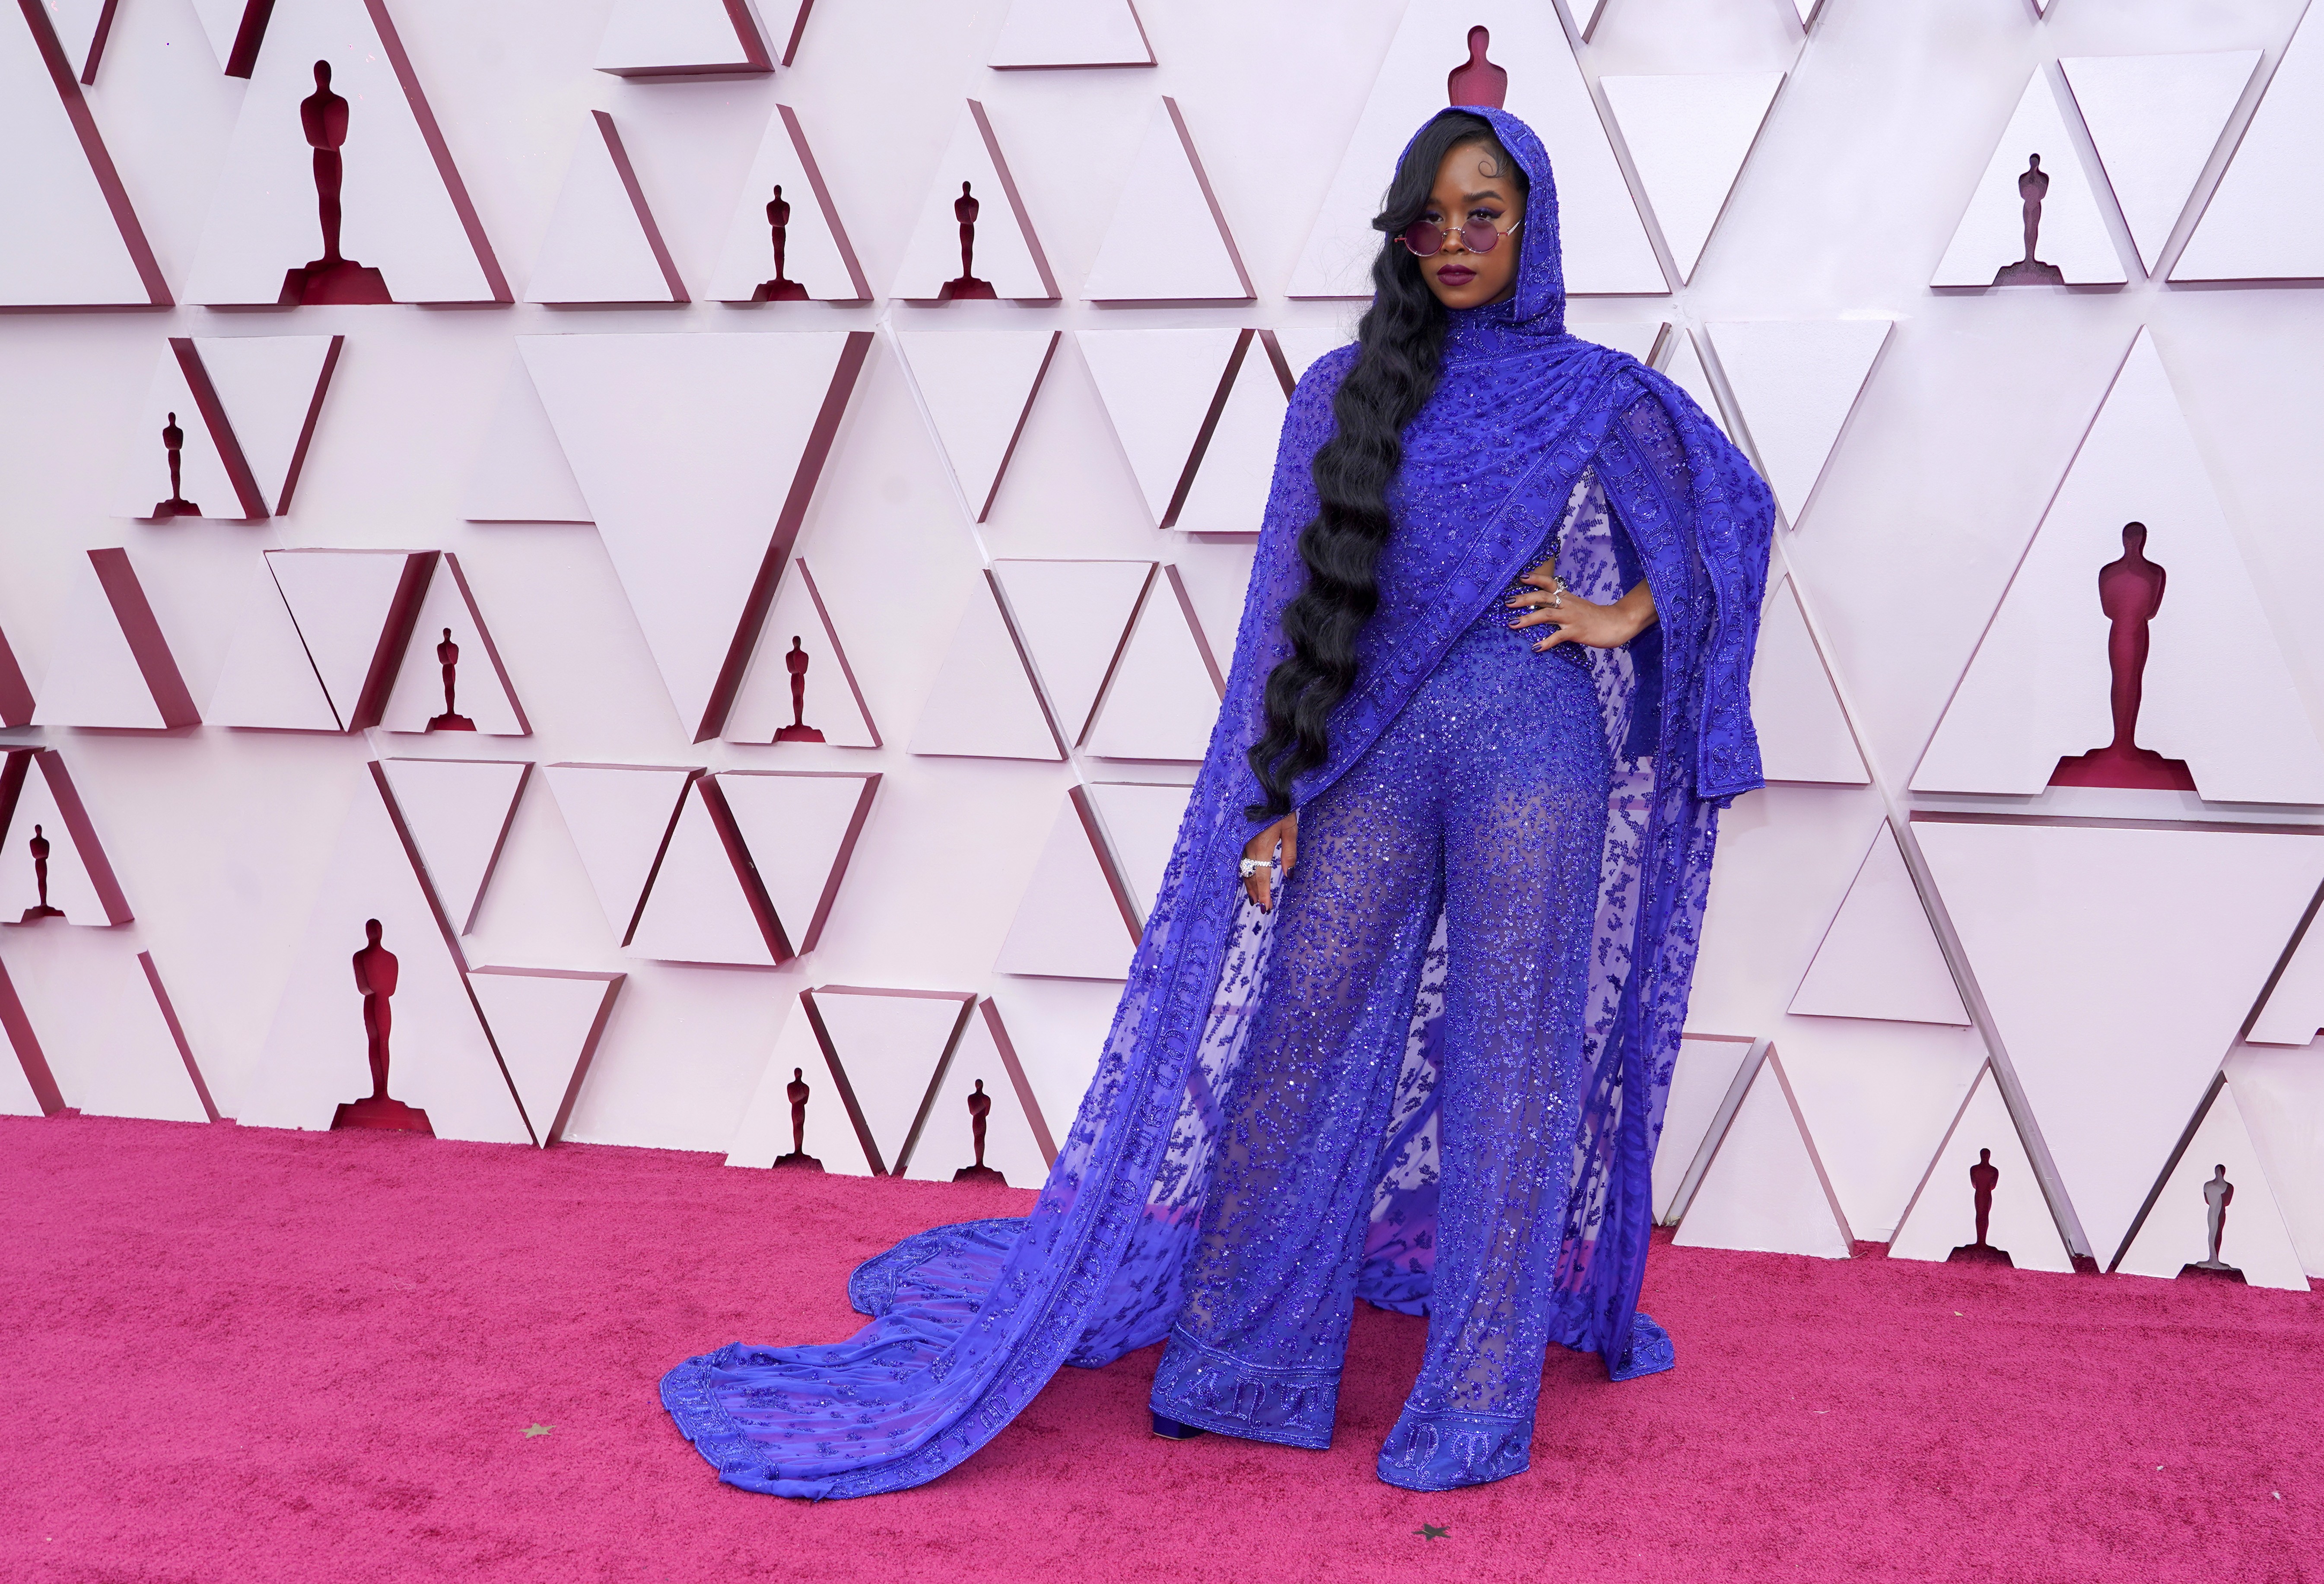 LOS ANGELES, CALIFORNIA – APRIL 25: H.E.R. attends the 93rd Annual Academy Awards at Union Station on April 25, 2021 in Los Angeles, California. (Photo by Chris Pizzello-Pool/Getty Images) (Foto: Getty Images)